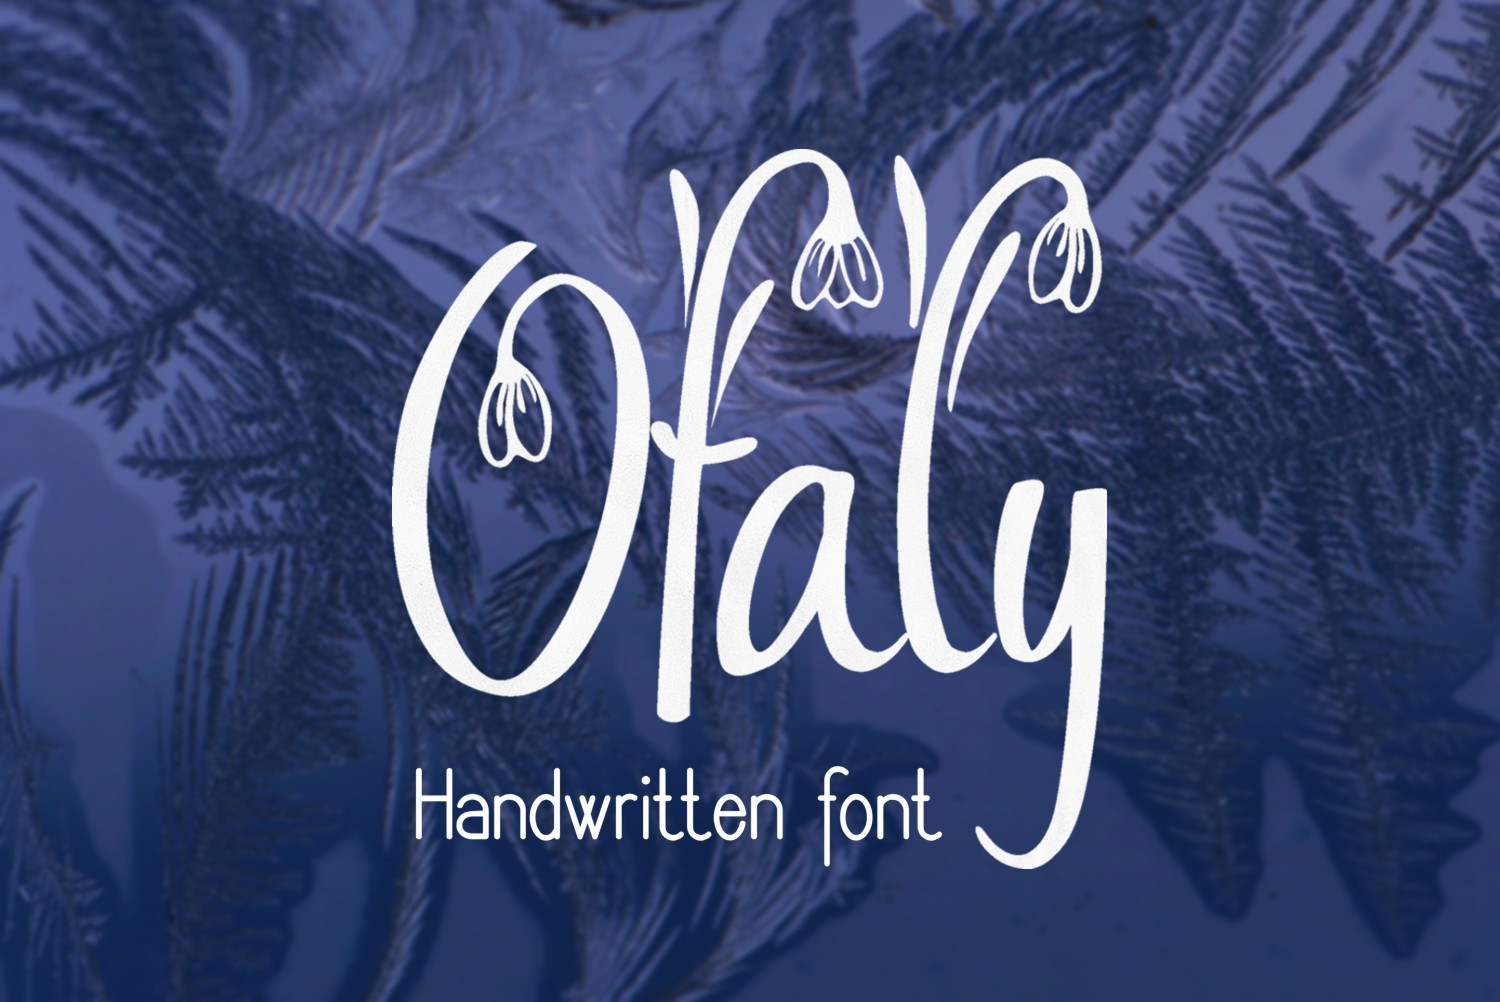 Ofaly Font Poster 1